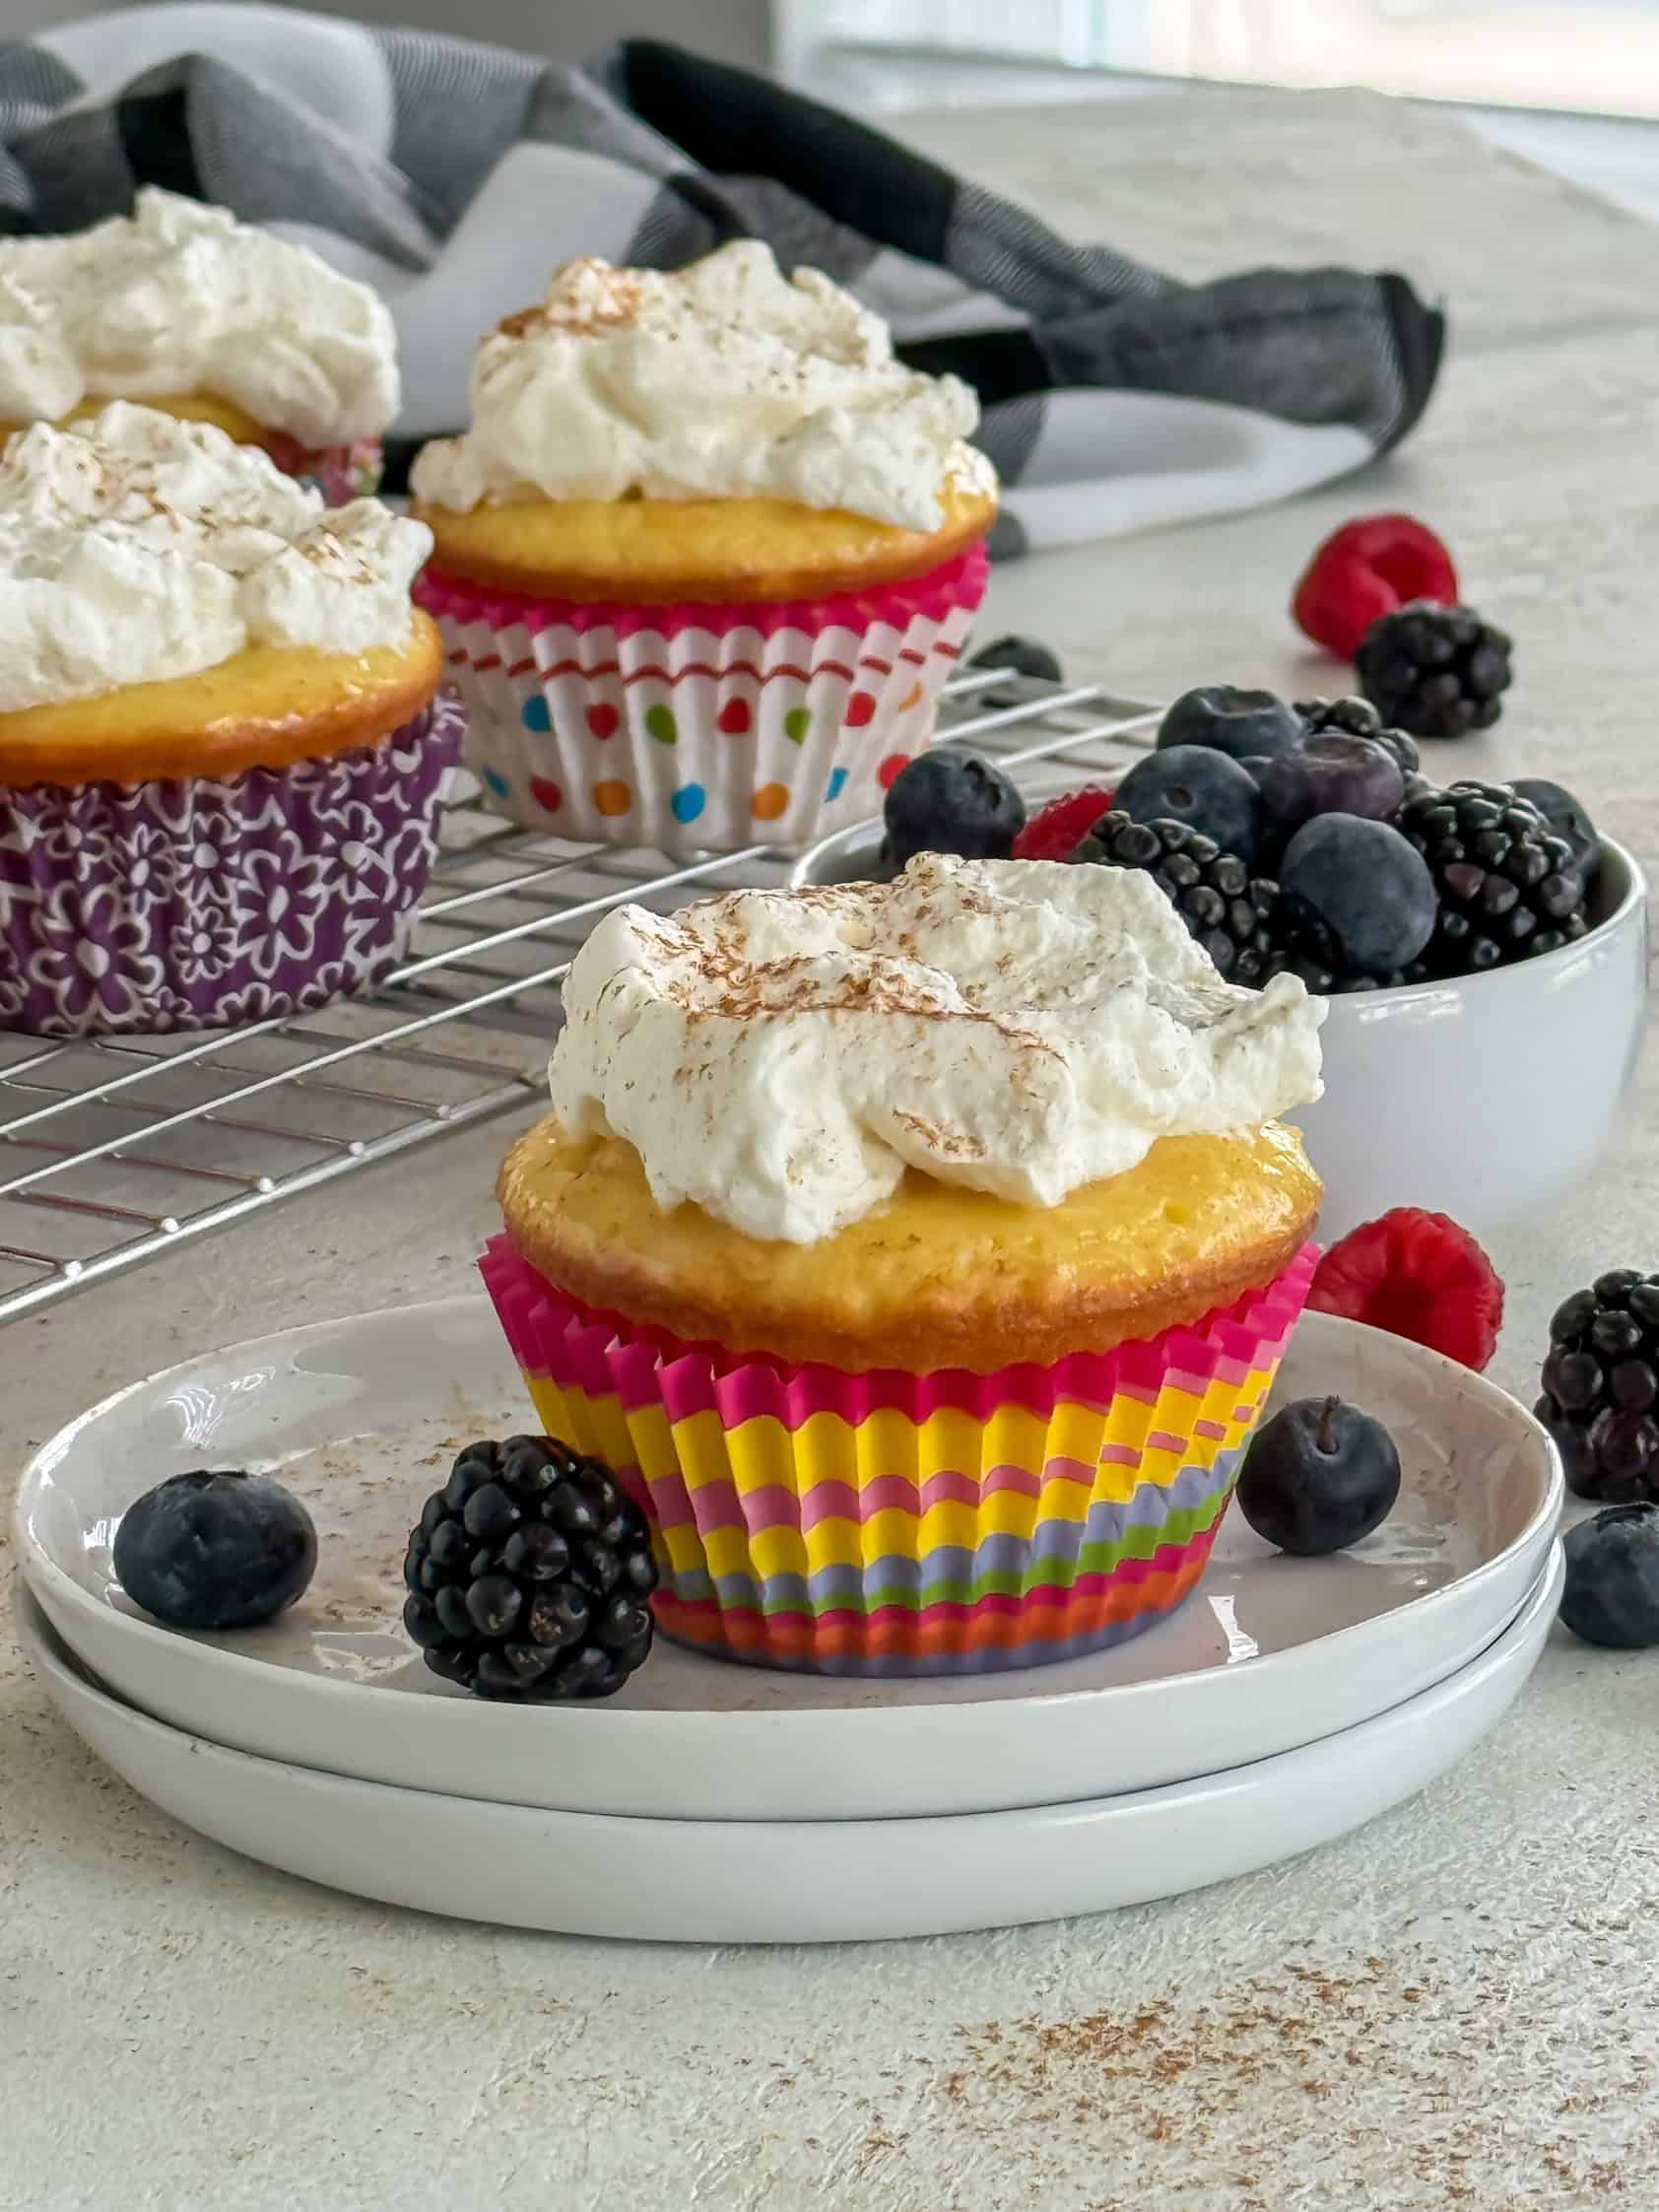 A colorful cupcake topped with whipped cream and a dusting of cinnamon, placed on a white plate with fresh berries.